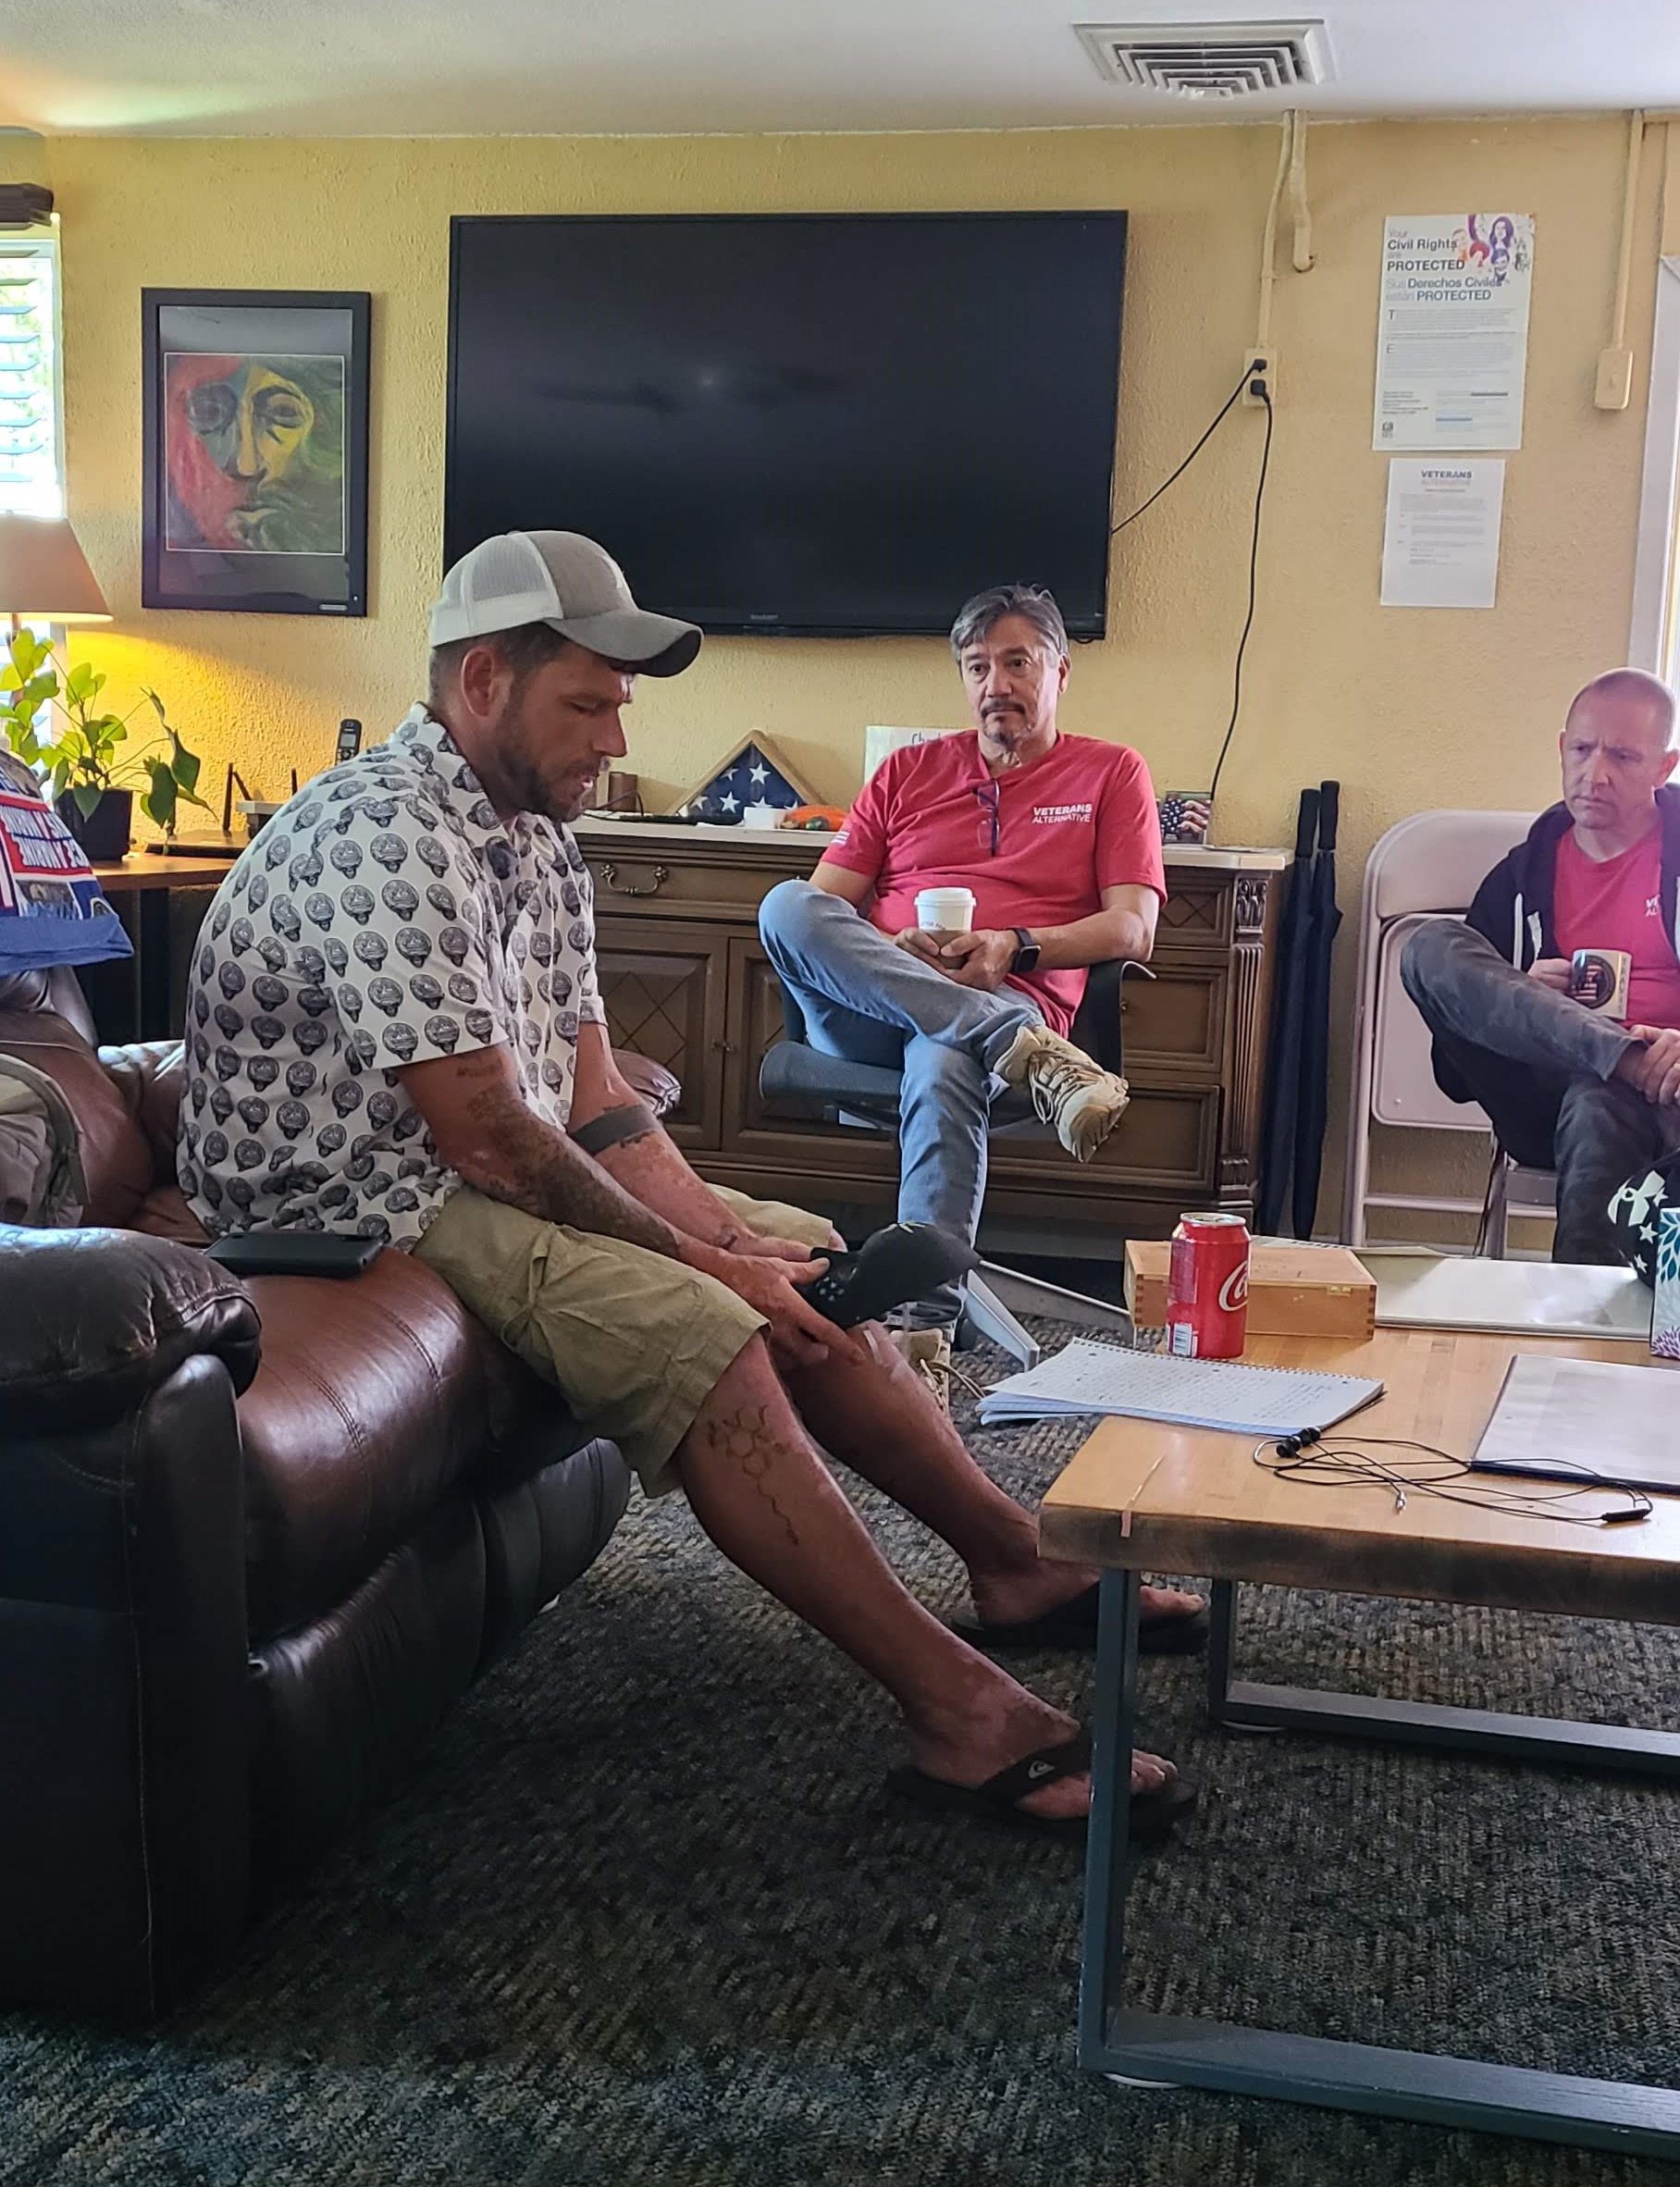 Tom, a US Army Infantry Veteran, at Veterans Alternative sharing his story with staff.